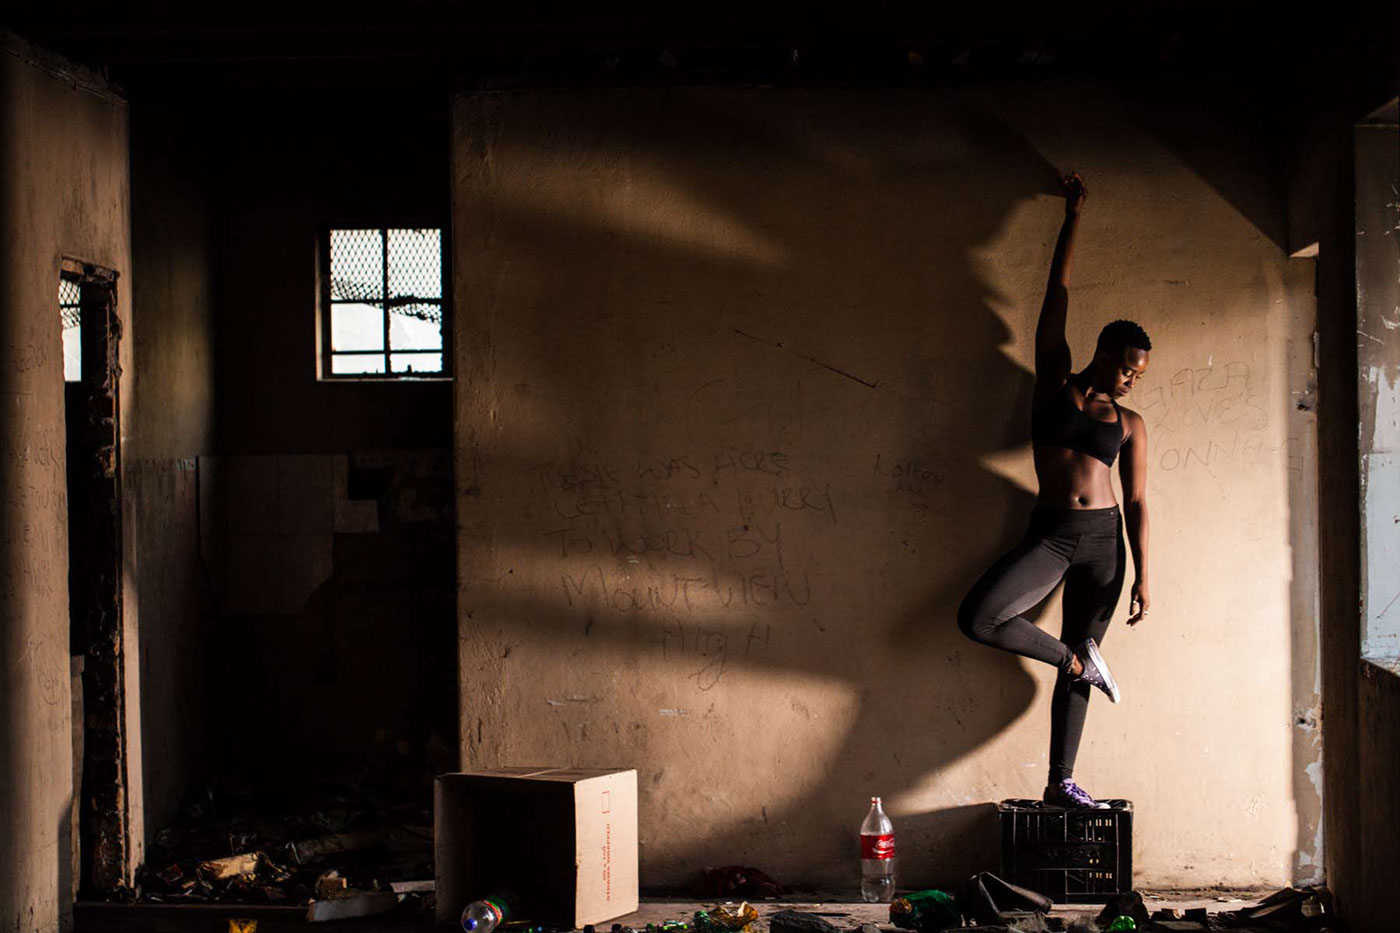 dancer contemporary dancer derelict Abandoned Building cape town Traffic Department dance photography train tracks